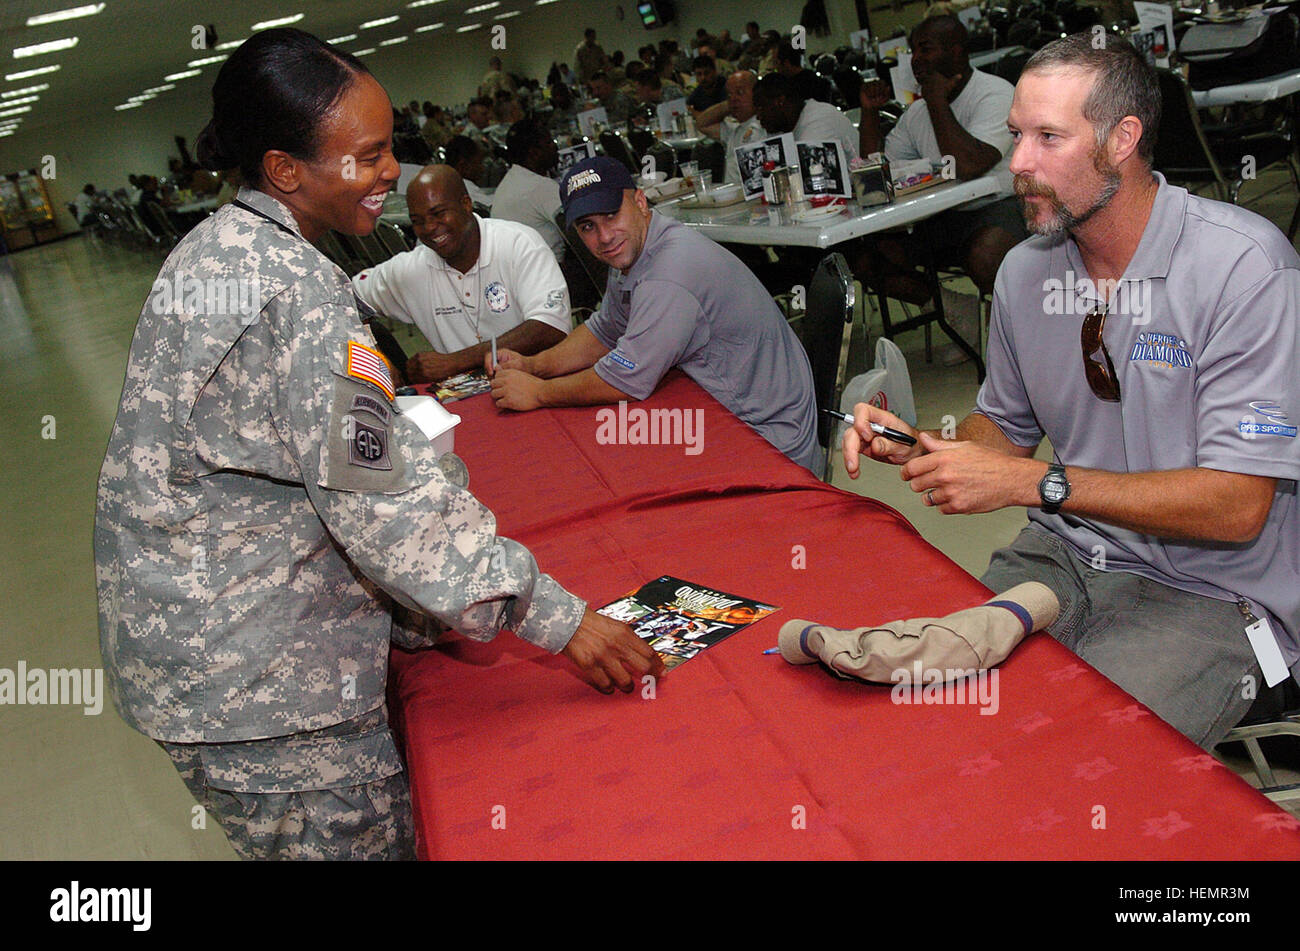 “I am a huge baseball fan!” said U.S. Army Lt. Col. Sheila Bryant, from Fayetteville, N.C., to Jack McDowell, a retired Major League Baseball pitcher, at Camp As Sayliyah in Qatar on Sept. 27, 2007. During his 13-year career, McDowell was commonly known as “Black Jack” by his teammates because of his dark beard. “Black Jack was a powerful pitcher,” said Bryant. McDowell and two other professional baseball athletes visited troops in Qatar and Afghanistan during their Heroes of the Diamond tour. Jack McDowell Qatar 2 Stock Photo